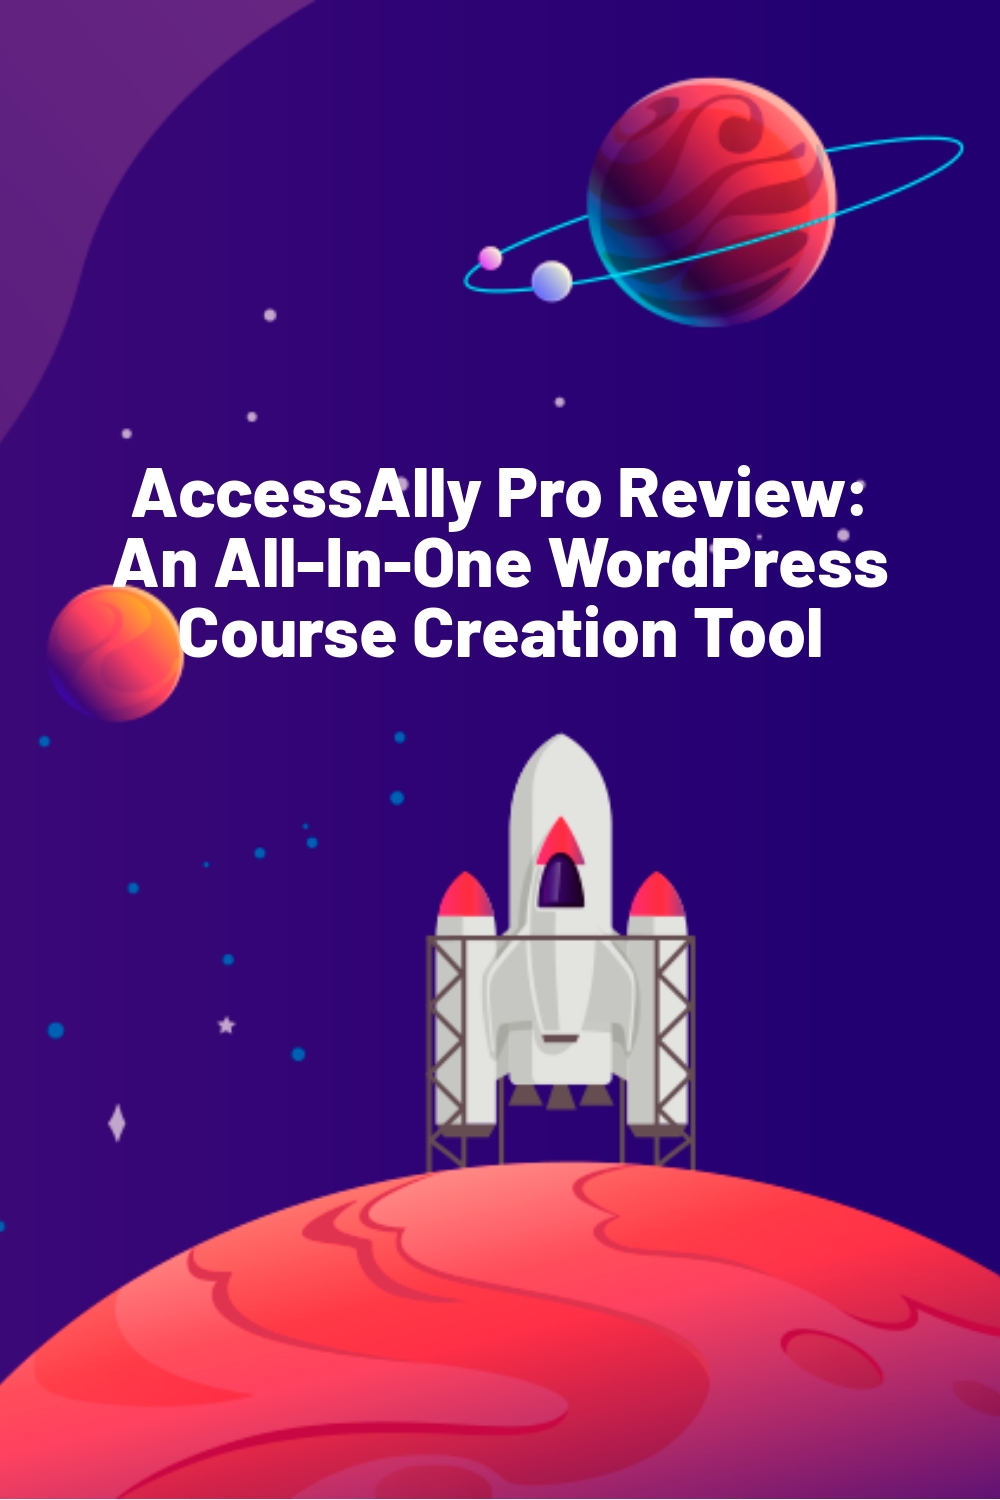 AccessAlly Pro Review: An All-In-One WordPress Course Creation Tool